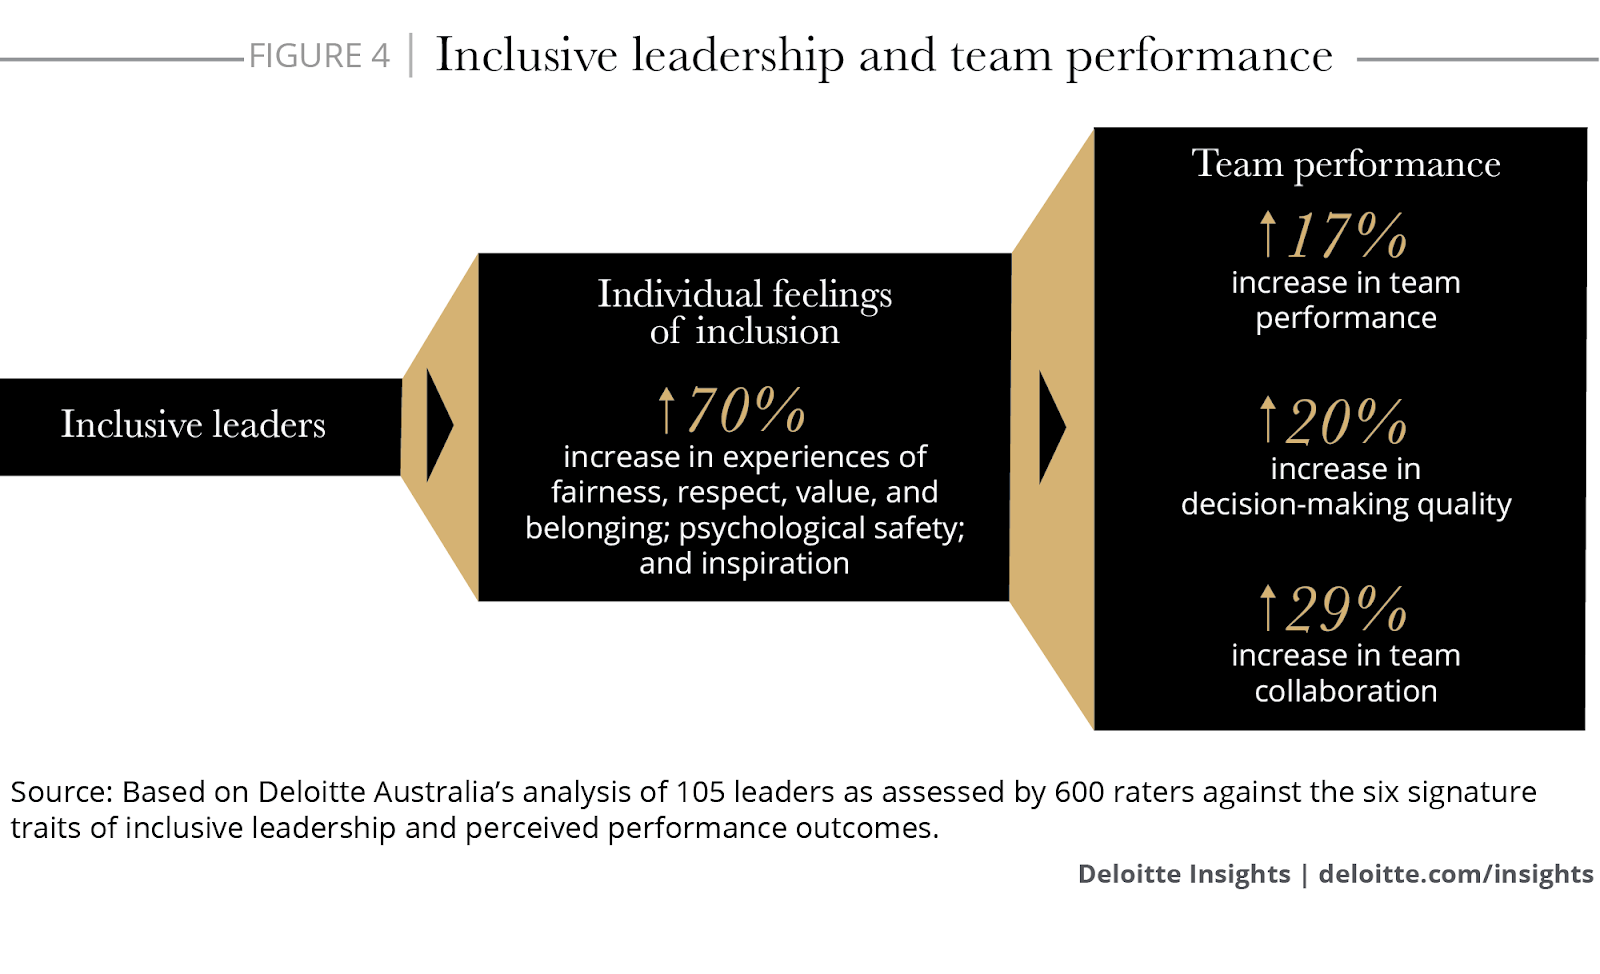 Chart showing increase of individual feelings of inclusion increase lead to increased team performance